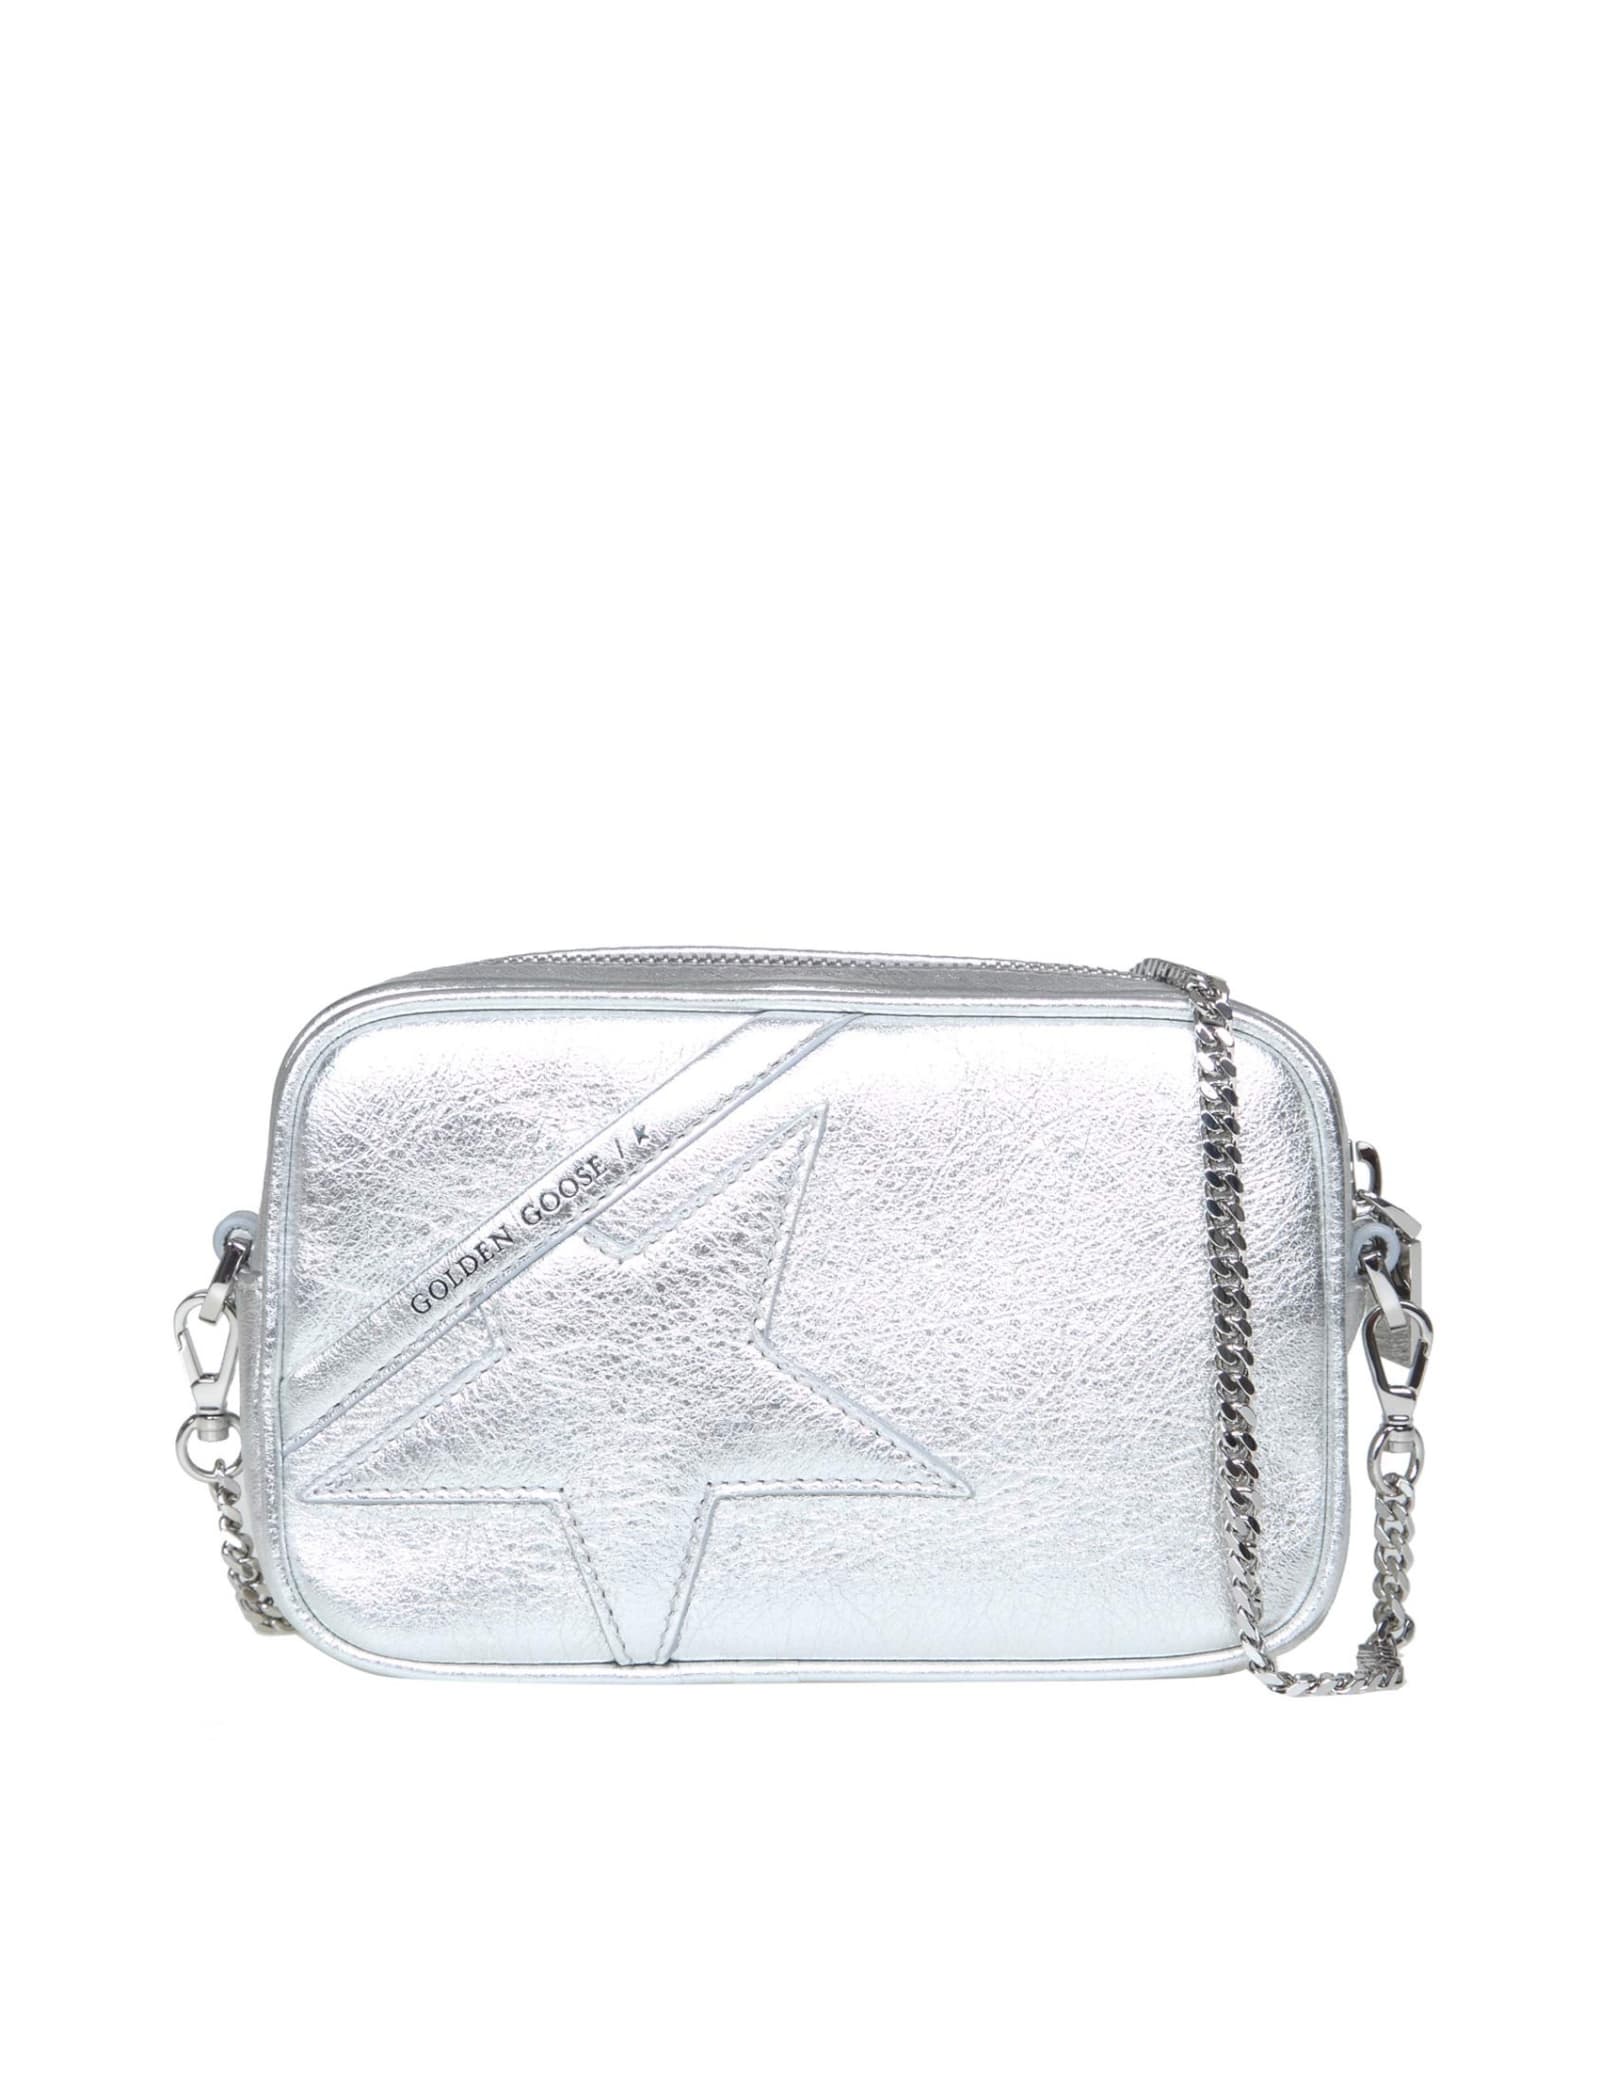 Golden Goose Mini Star Bag In Silver Color Leather